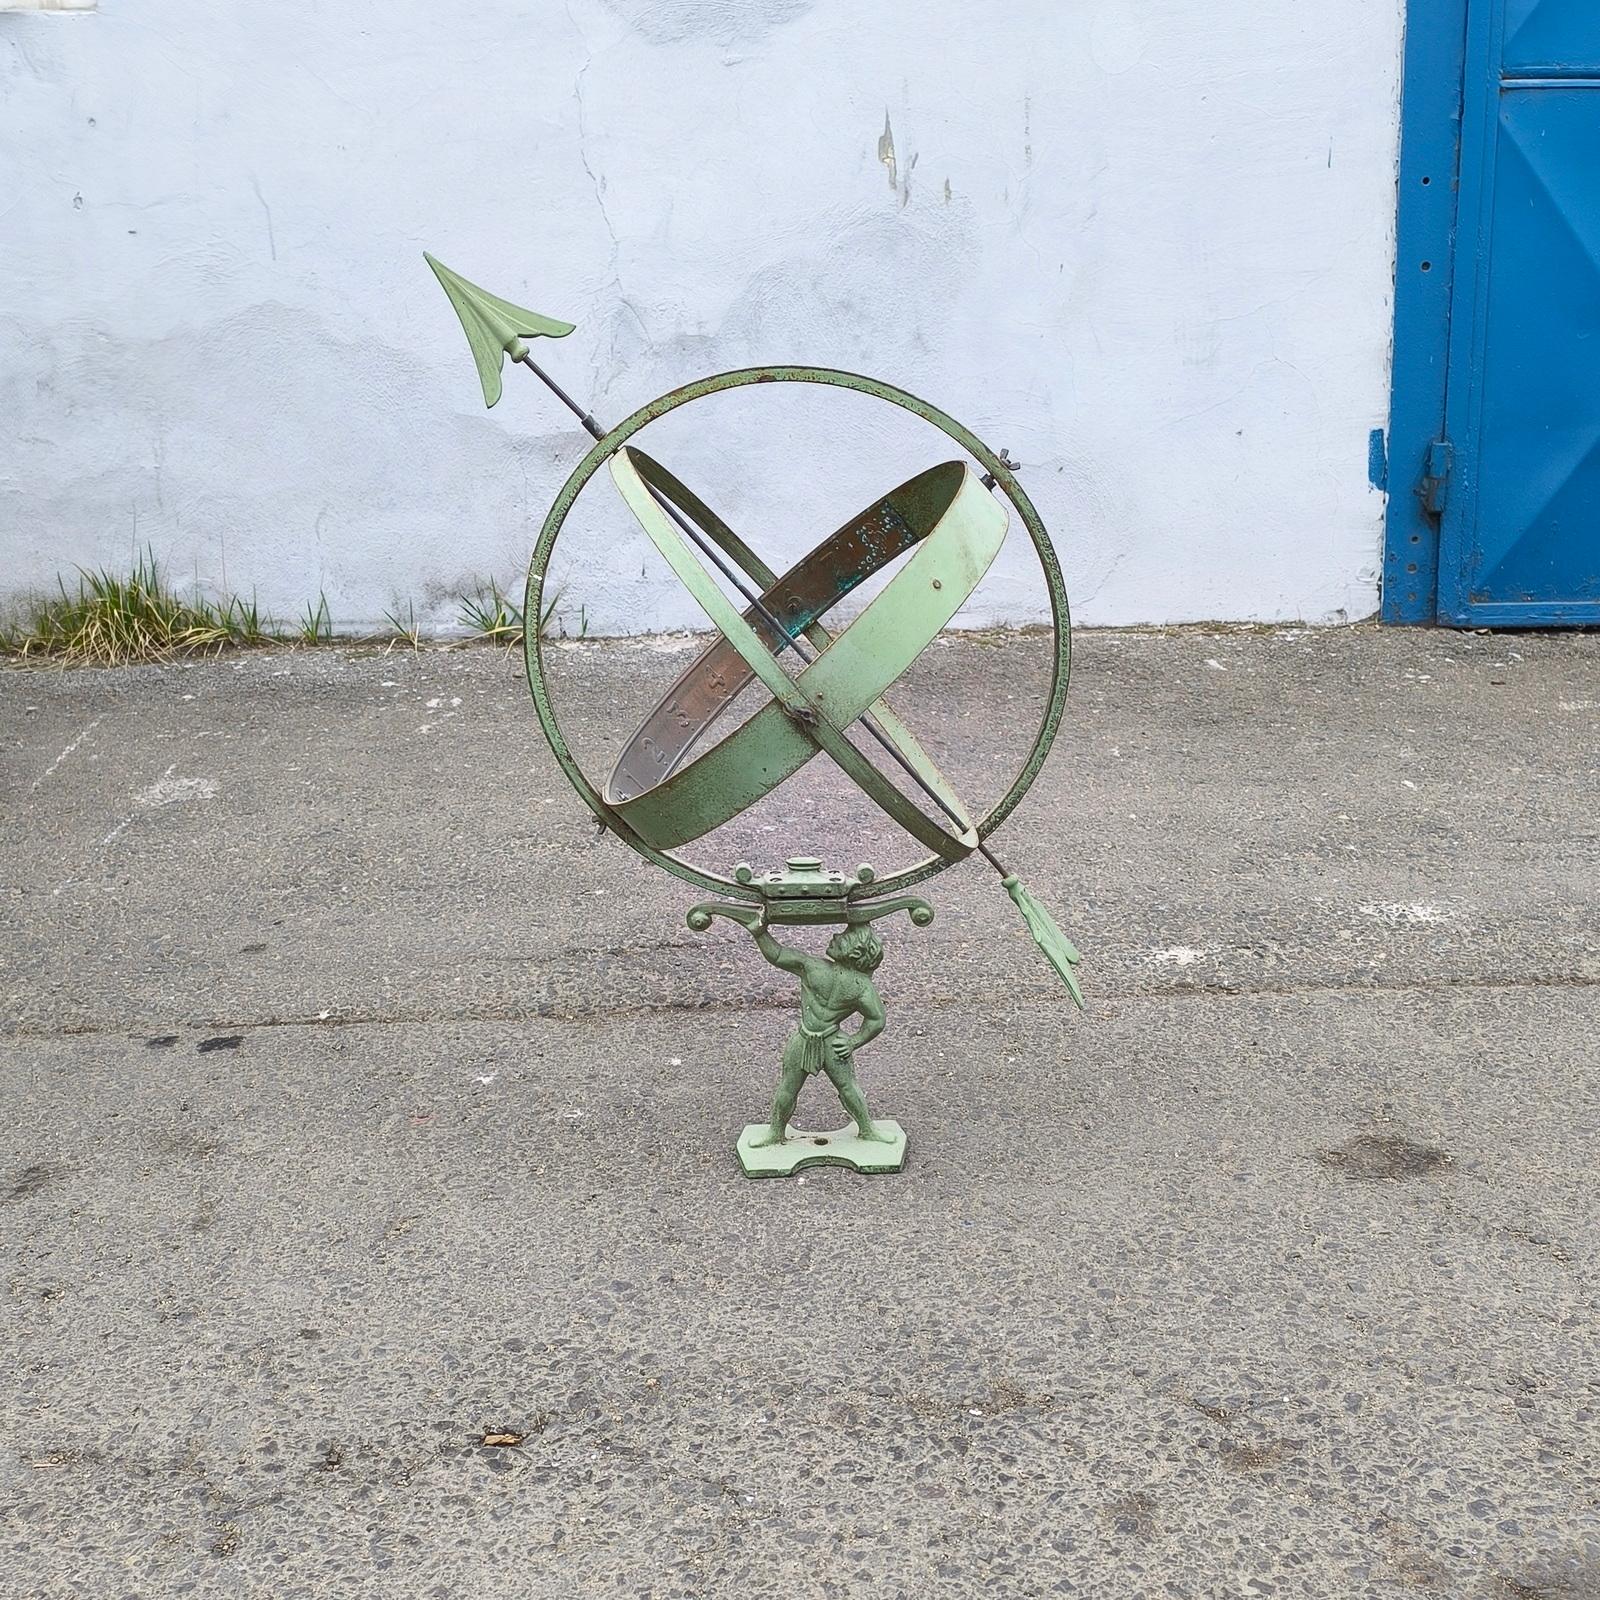 Vintage Original Sun Clock or Armillary Sun Dial attributed to Sune Rooth, mid-20th century.
Antique garden ornament from Sweden, known as a Sun Clock or Armillary Sun dial, with a cast metal figure holding spherical rings, that can be mounted on a